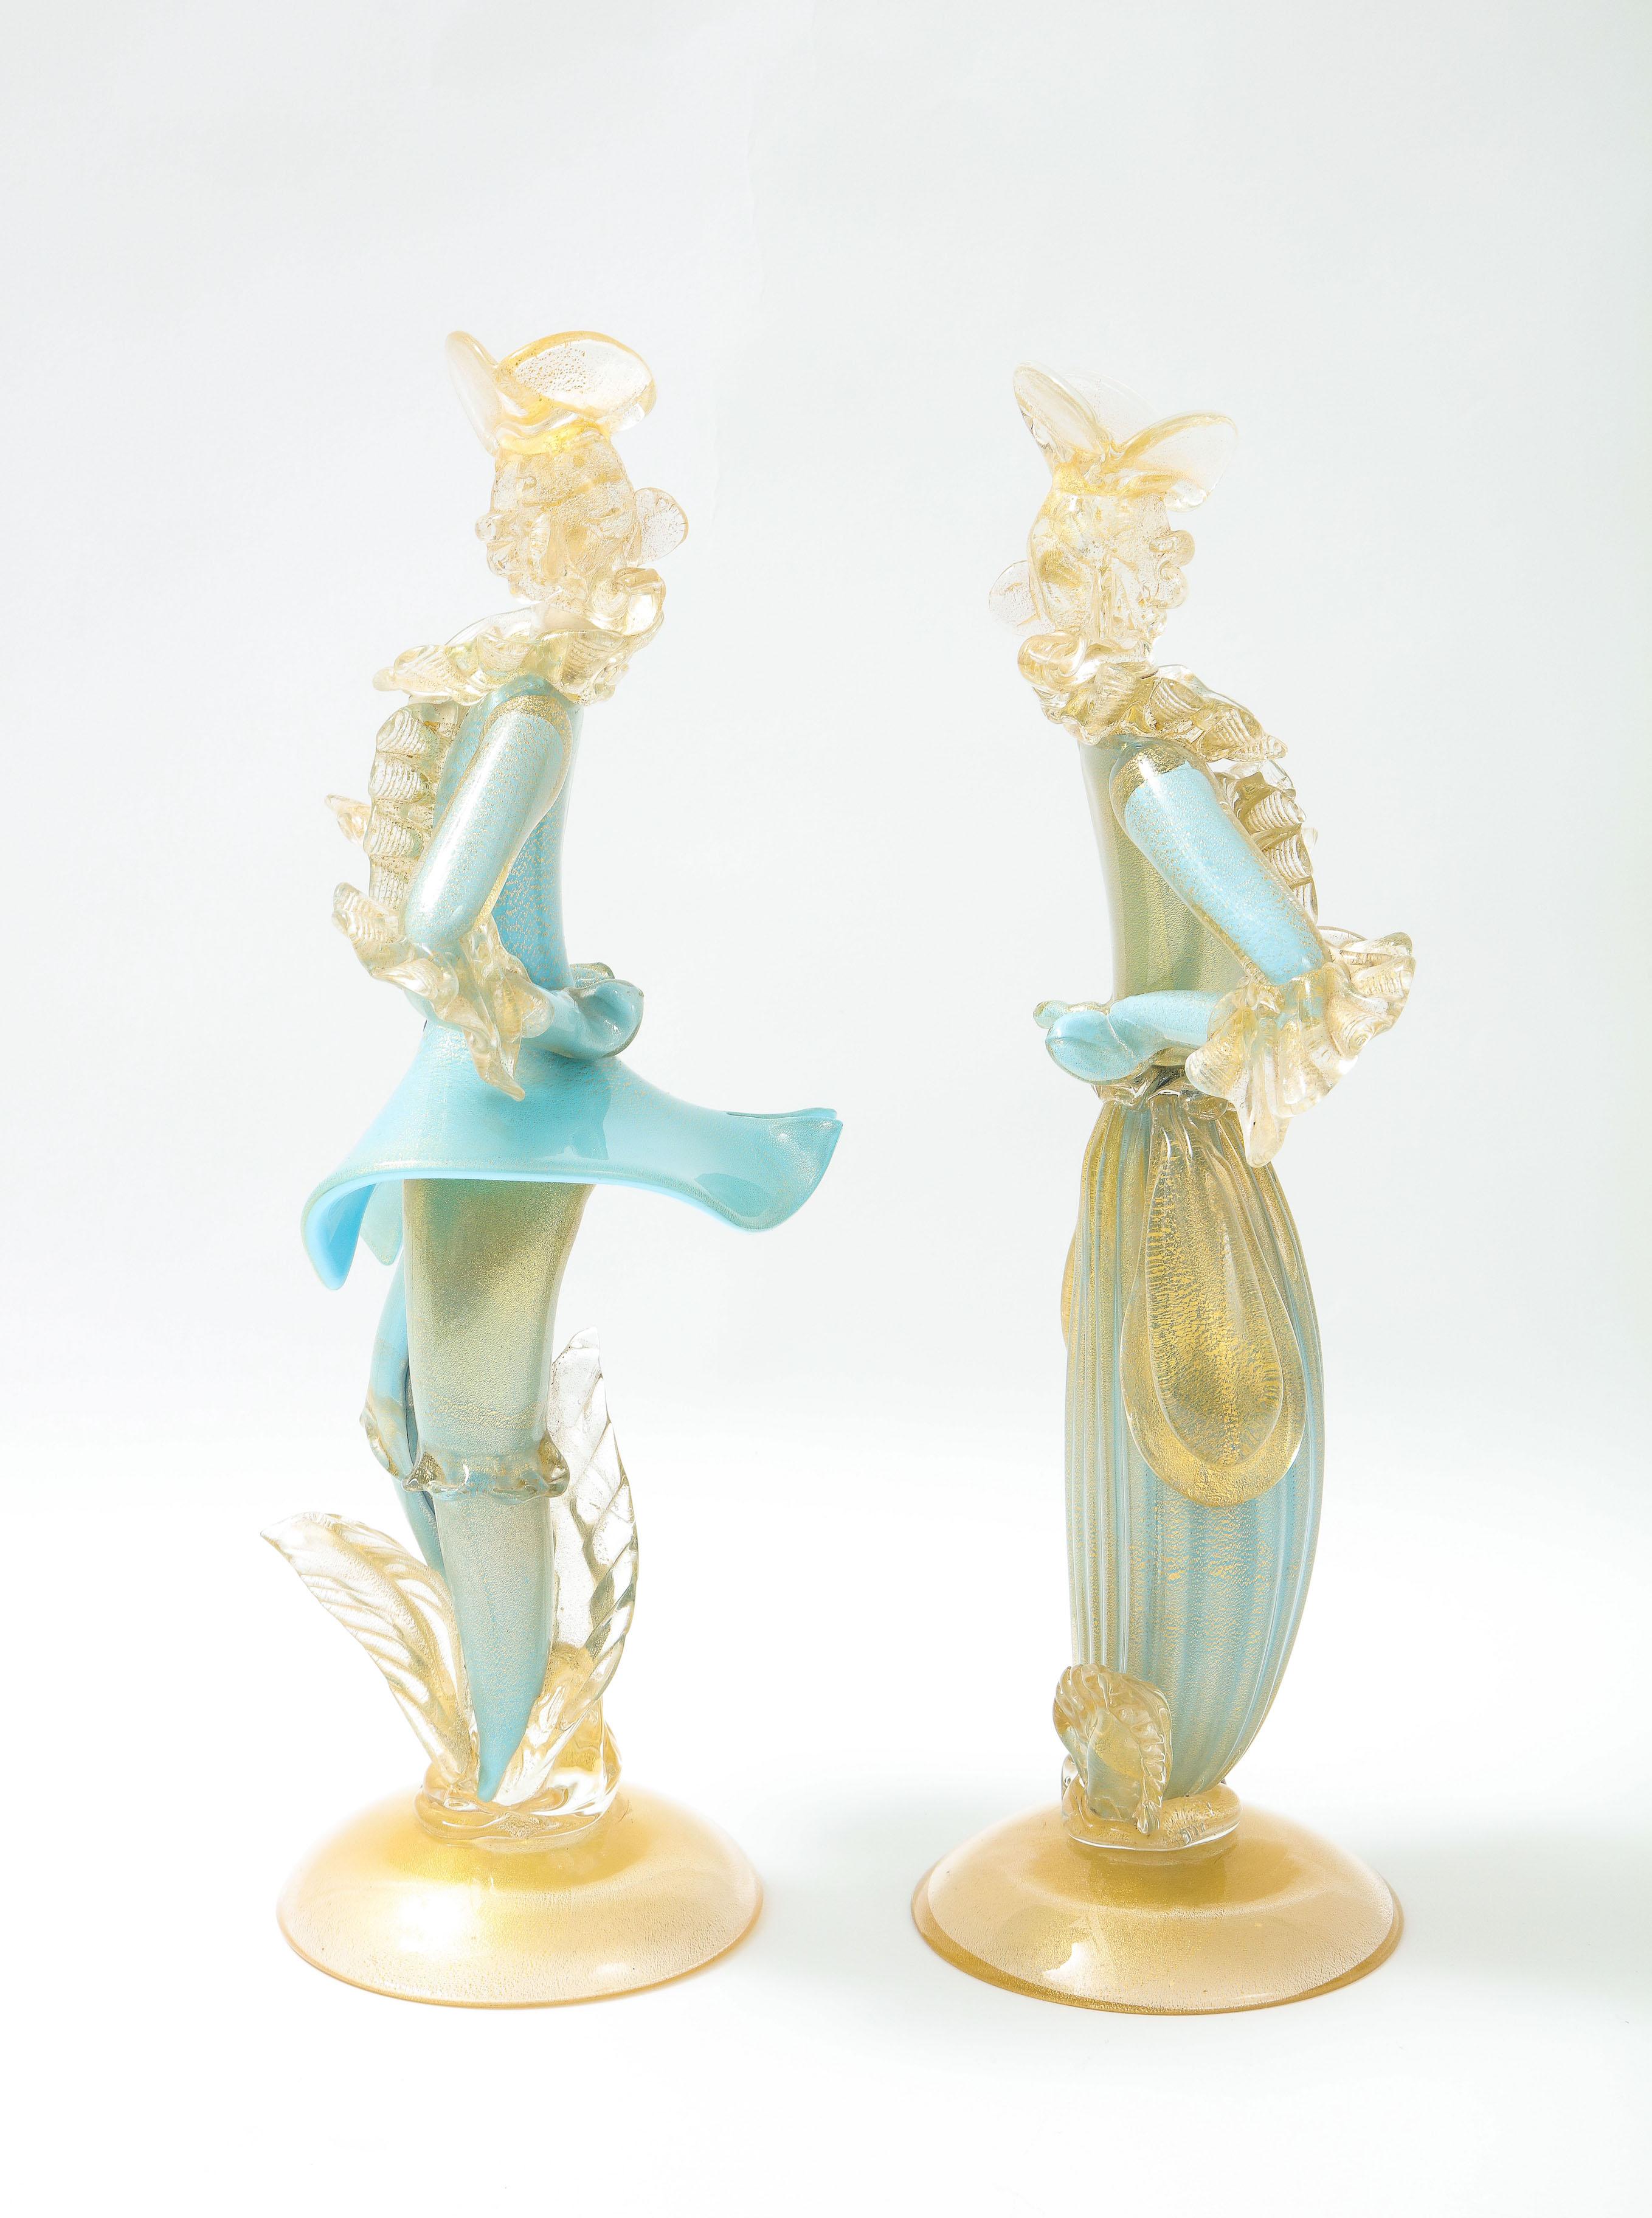 Pair of Turquoise Murano Glass Louis XV Style Figurines by Seguso Vetri Arte In Good Condition For Sale In Montreal, QC